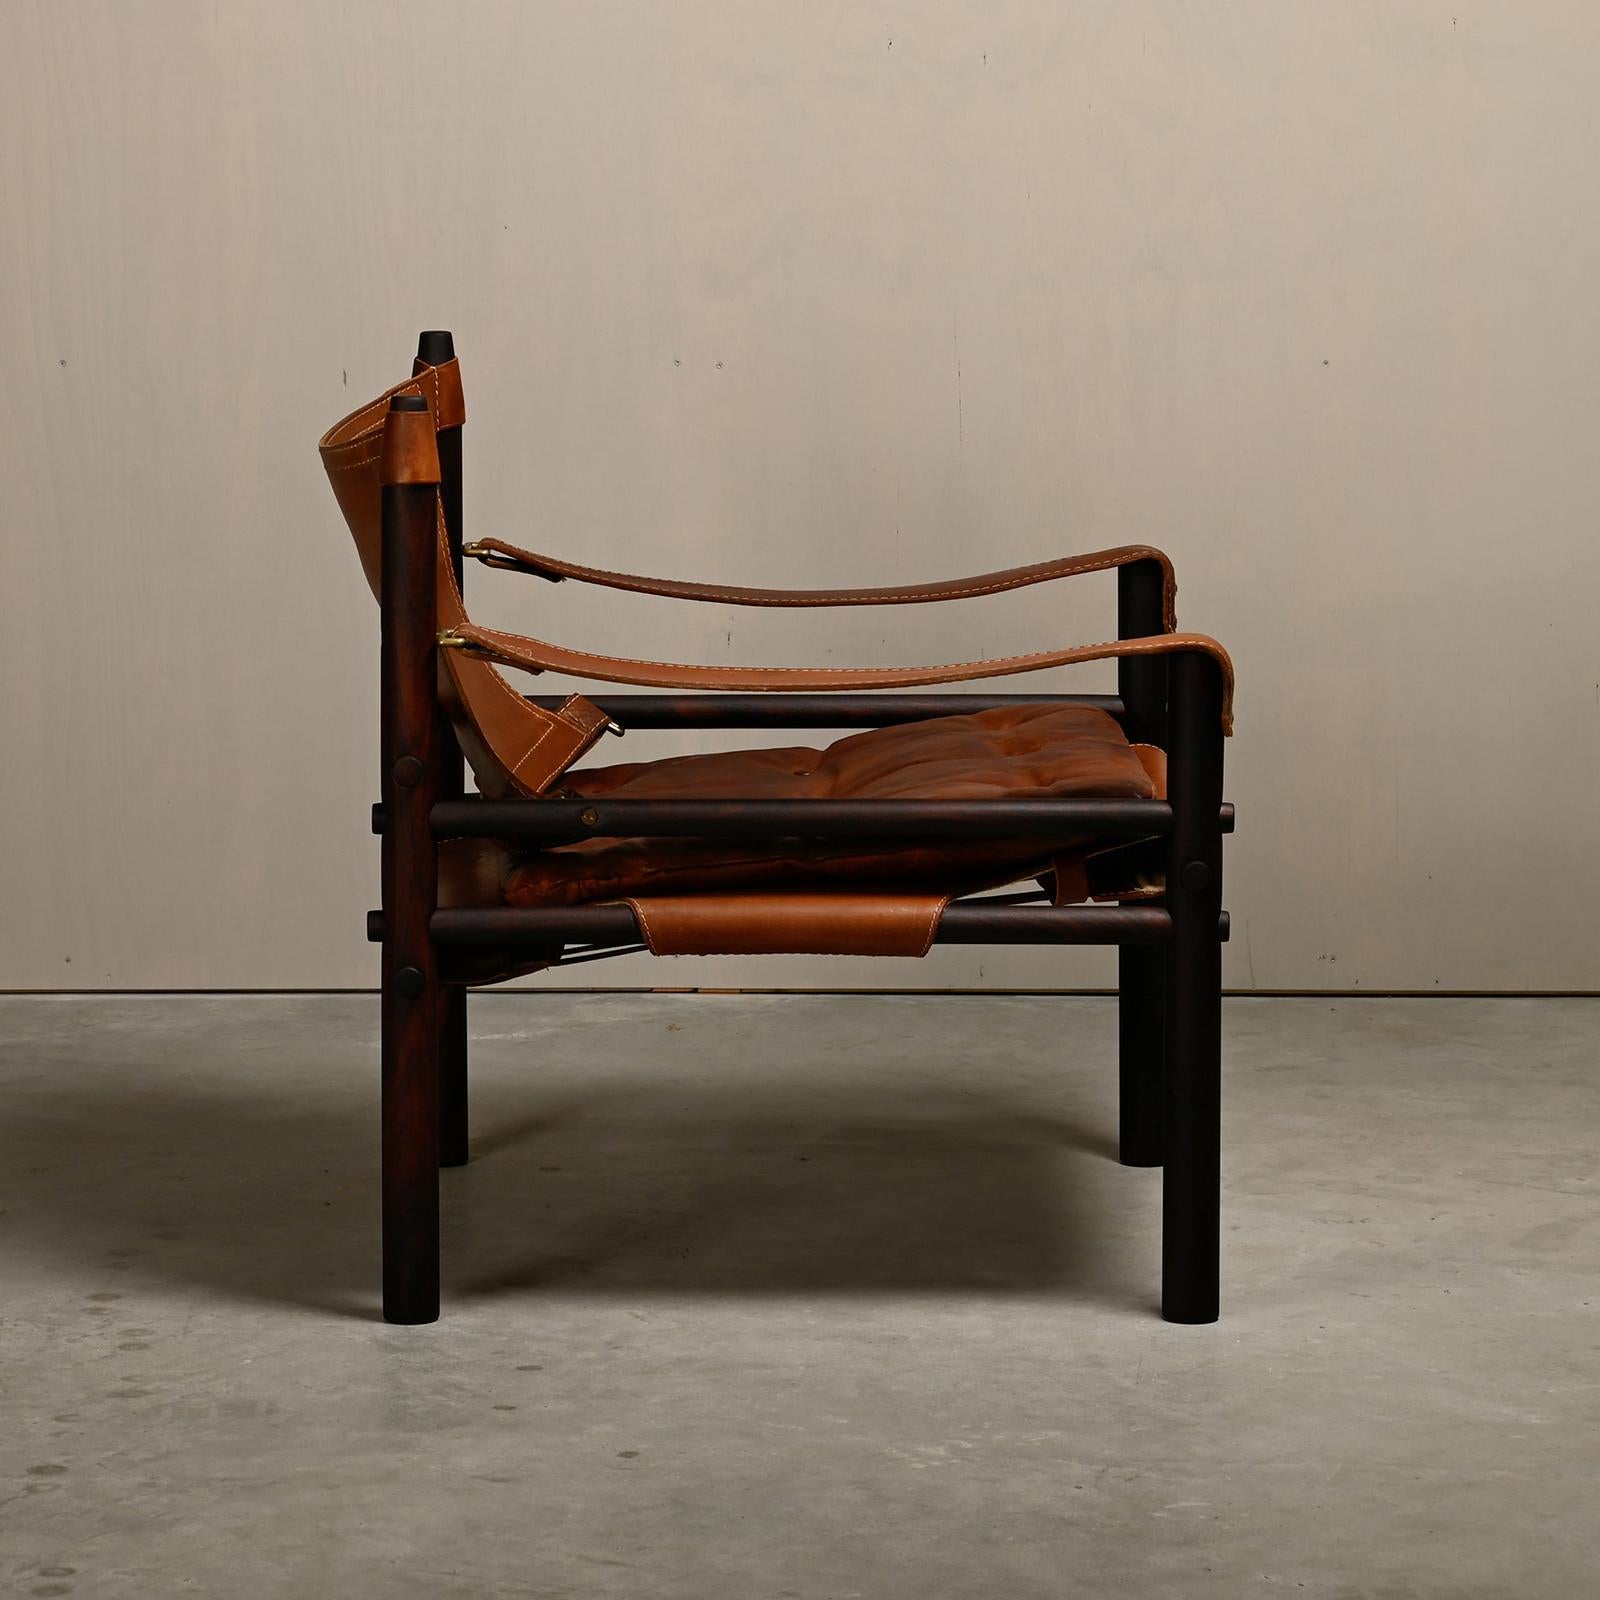 Arne Norell Sirocco Safari Lounge Chair in dark brown wood and leather, Sweden In Good Condition For Sale In Amsterdam, NL